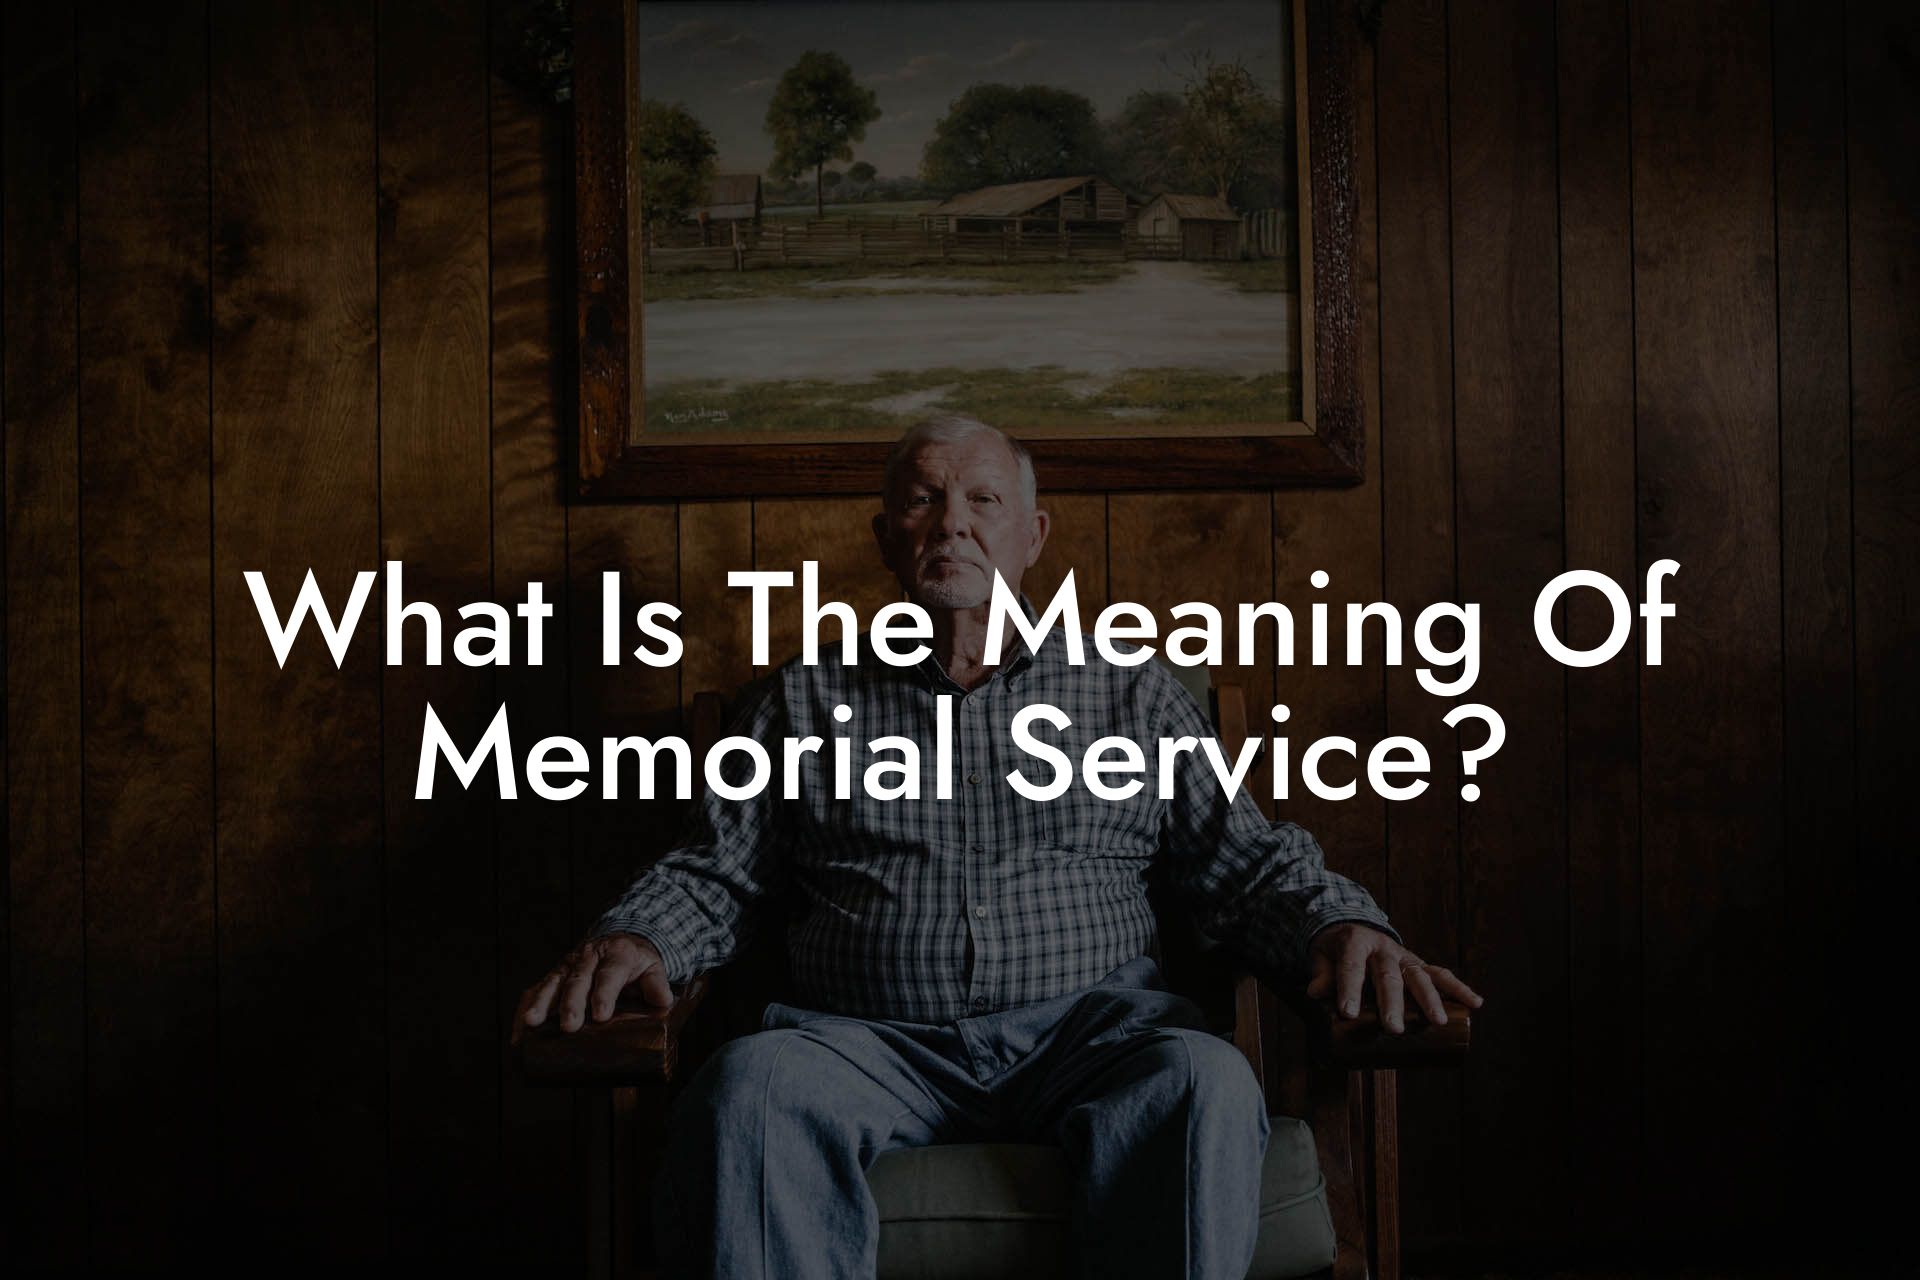 What Is The Meaning Of Memorial Service?